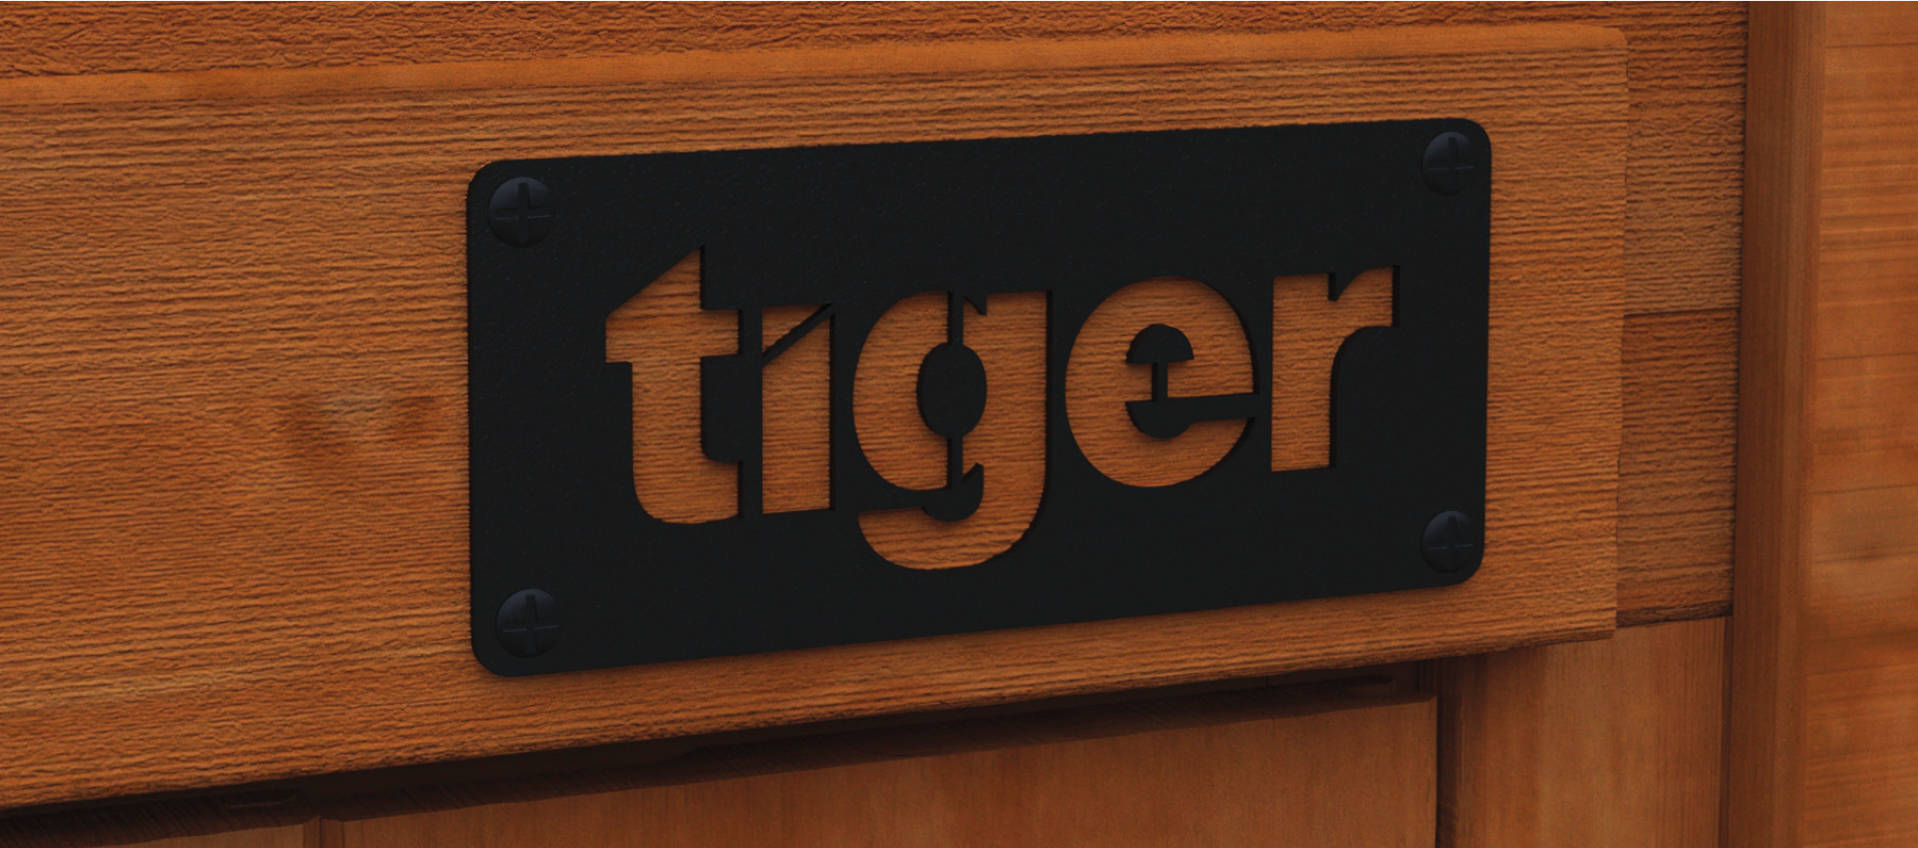 The Tiger Badge